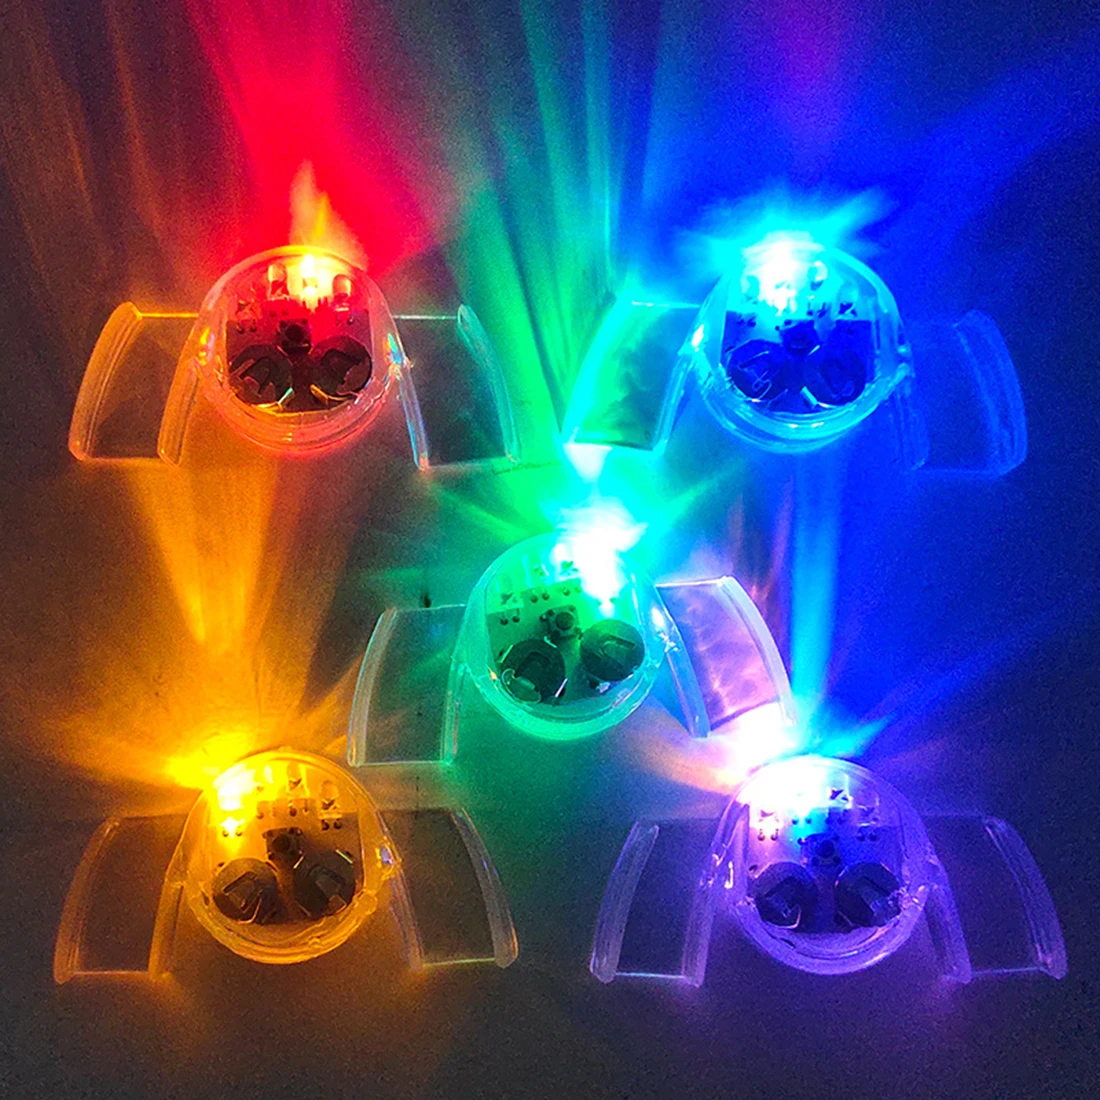 

1Pcs Creative Flashing LED Light Up Mouth Braces Piece Glow Teeth Halloween Party Rave Glow Party Supplies Decompression Toy